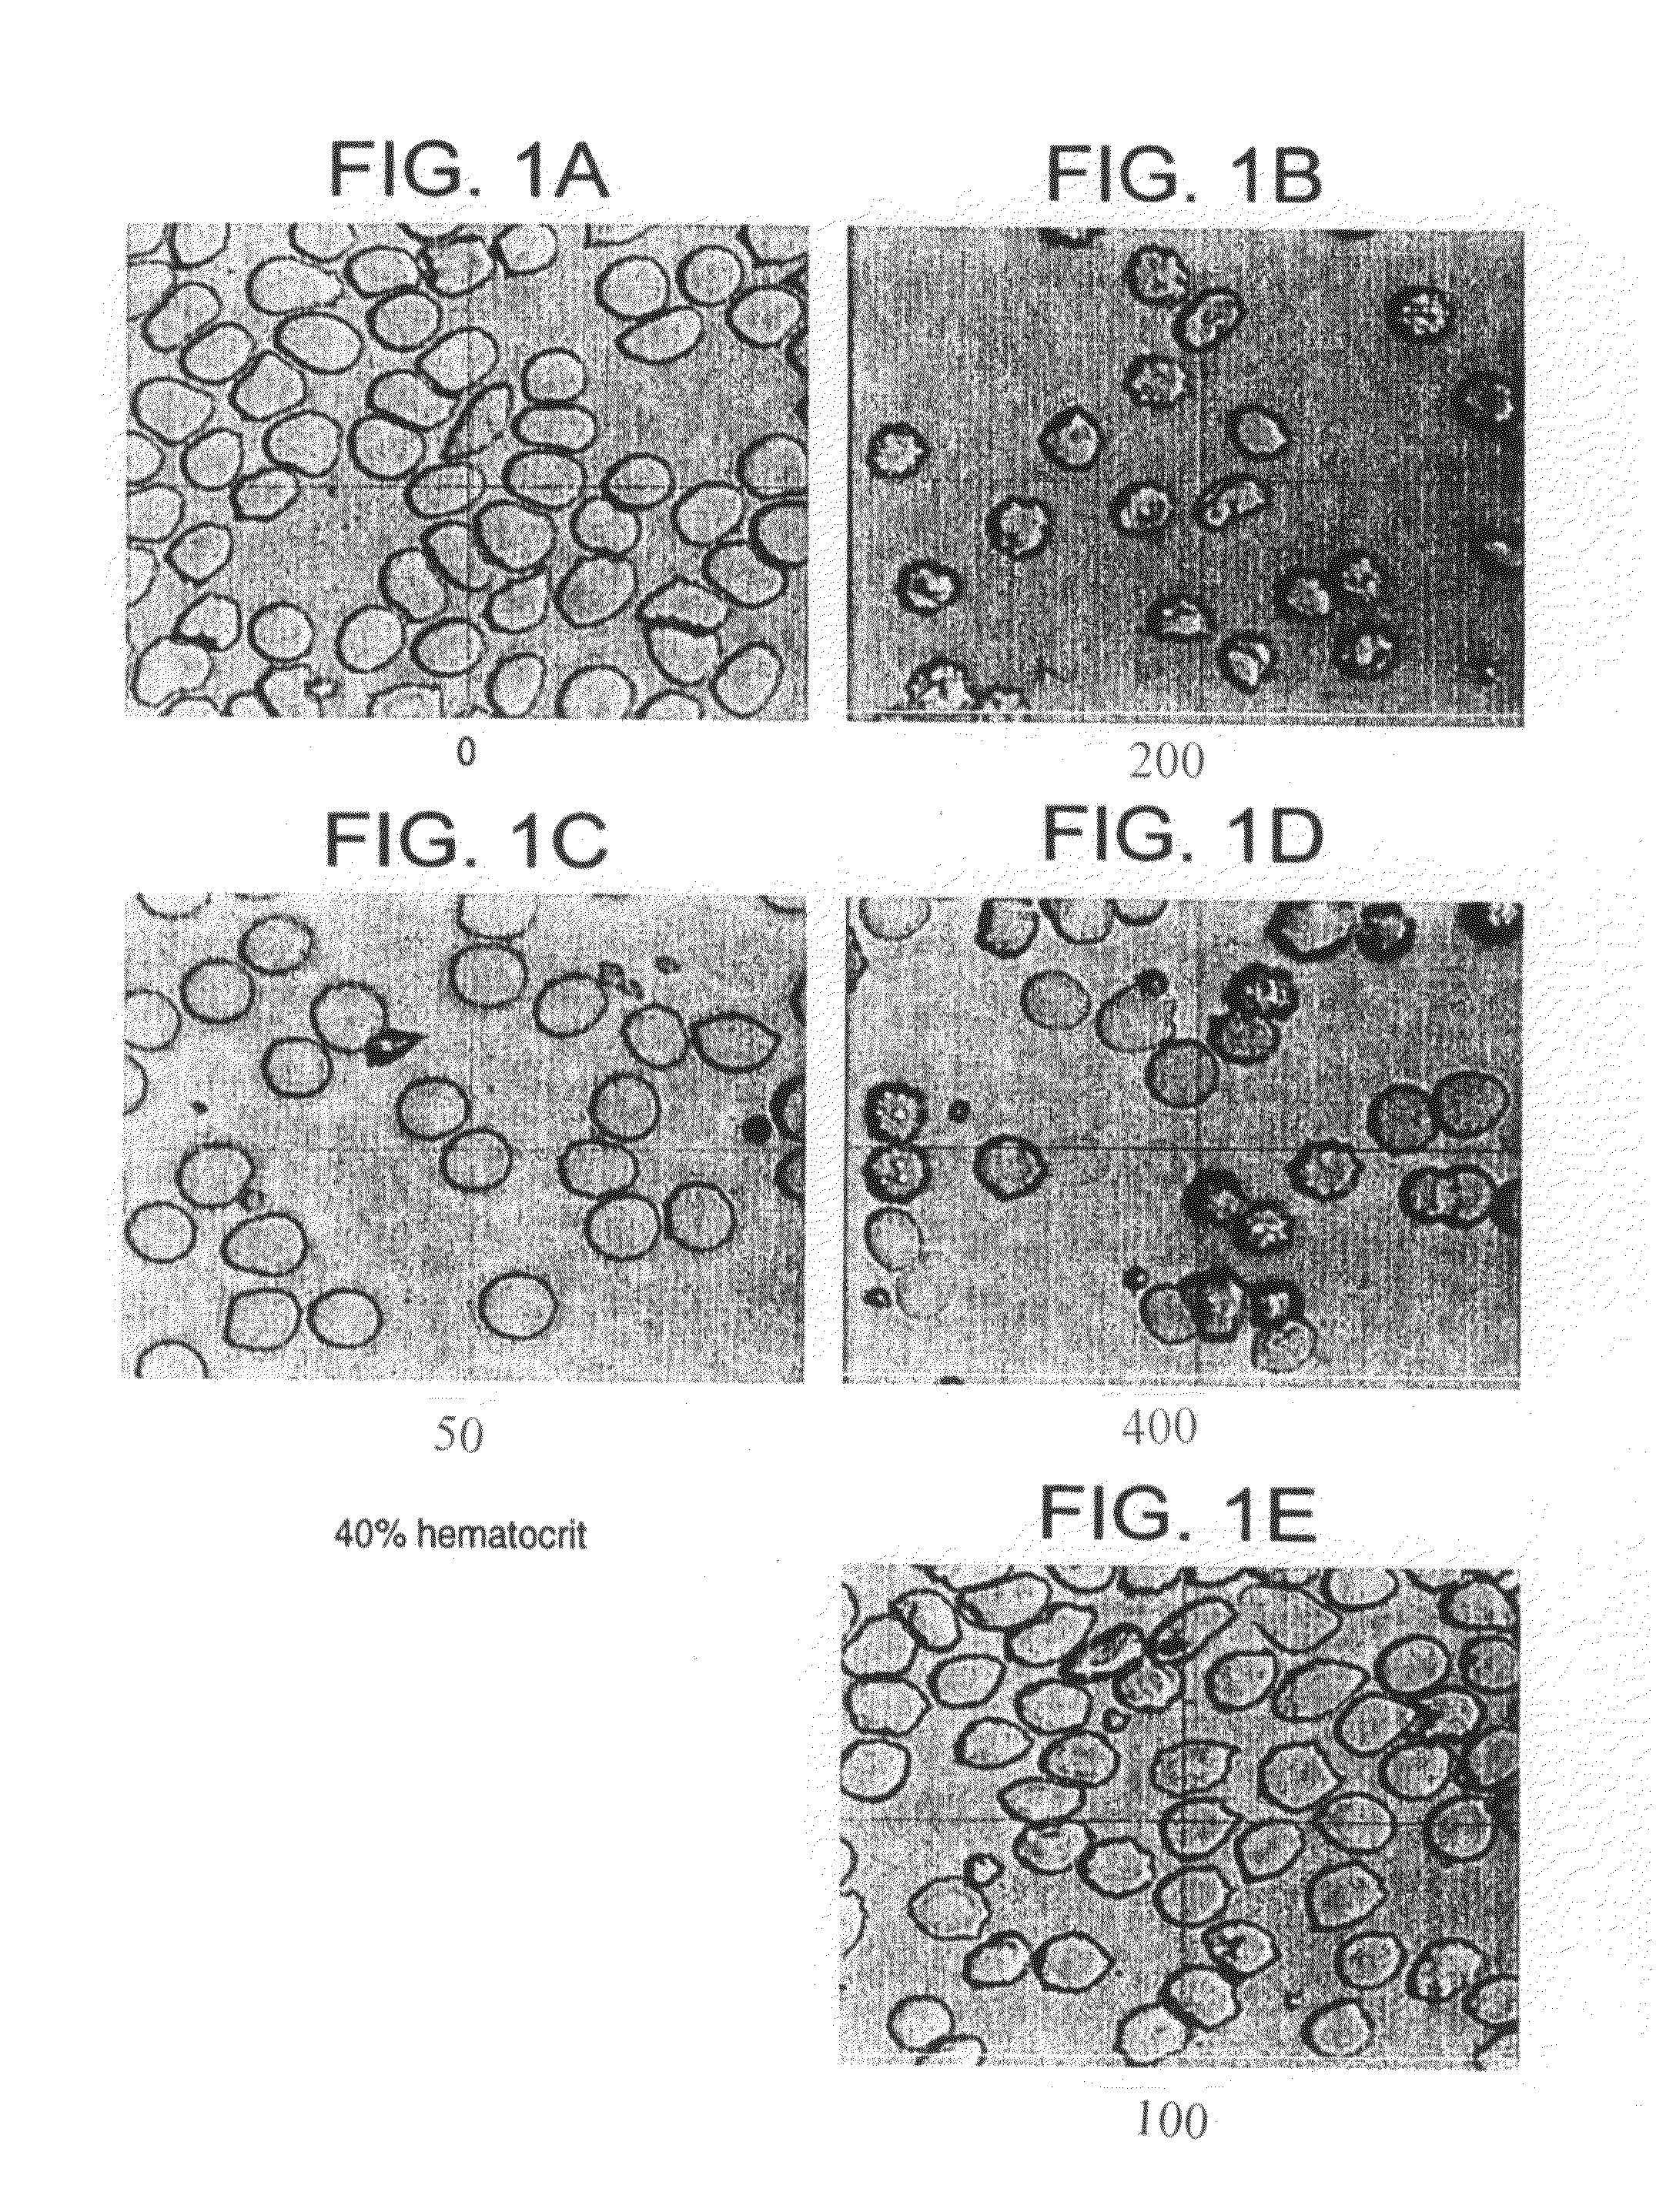 Method for reducing effect of hematocrit on measurement of an analyte in whole blood